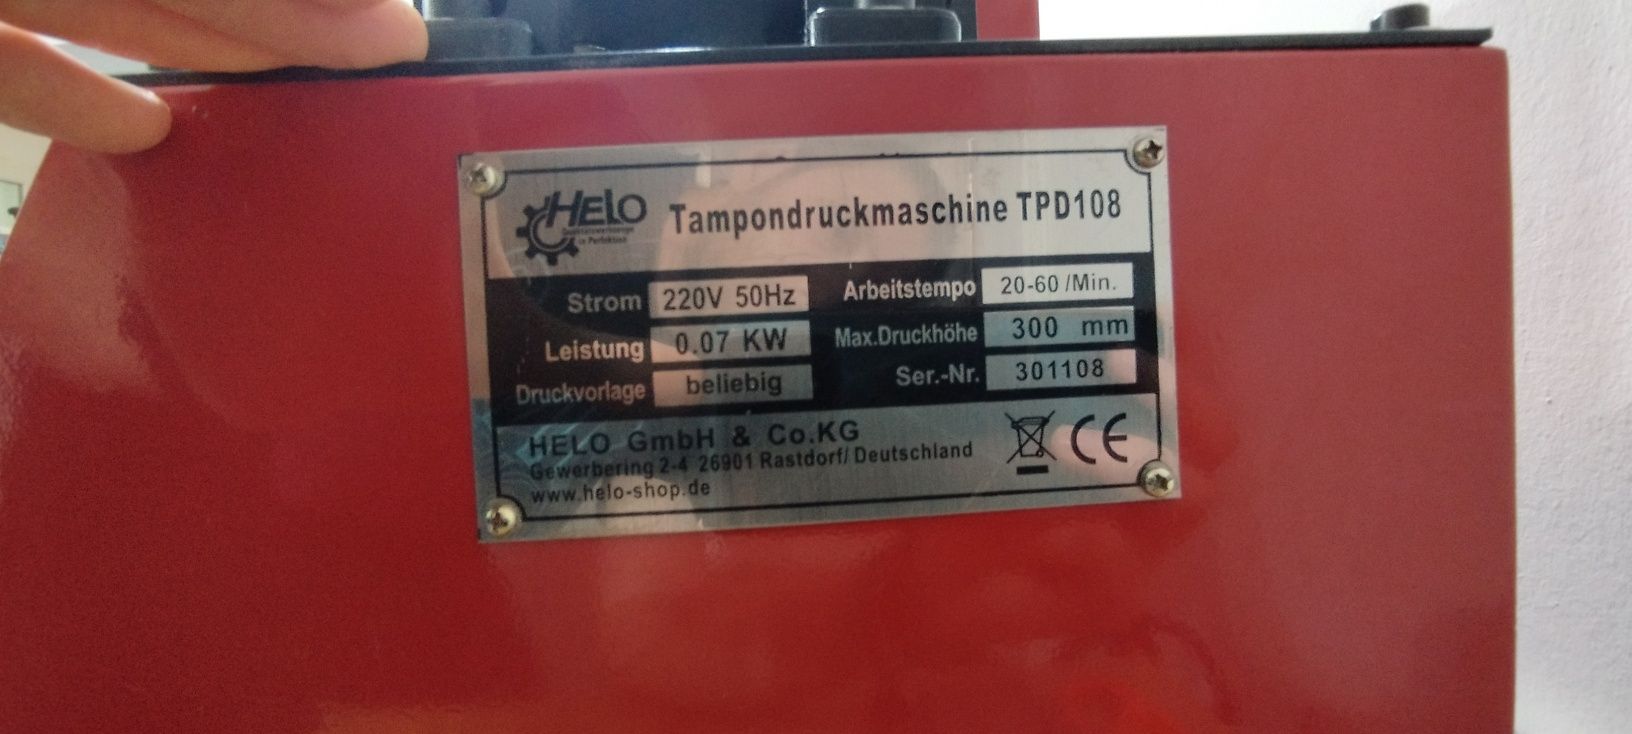 Tampograf electric